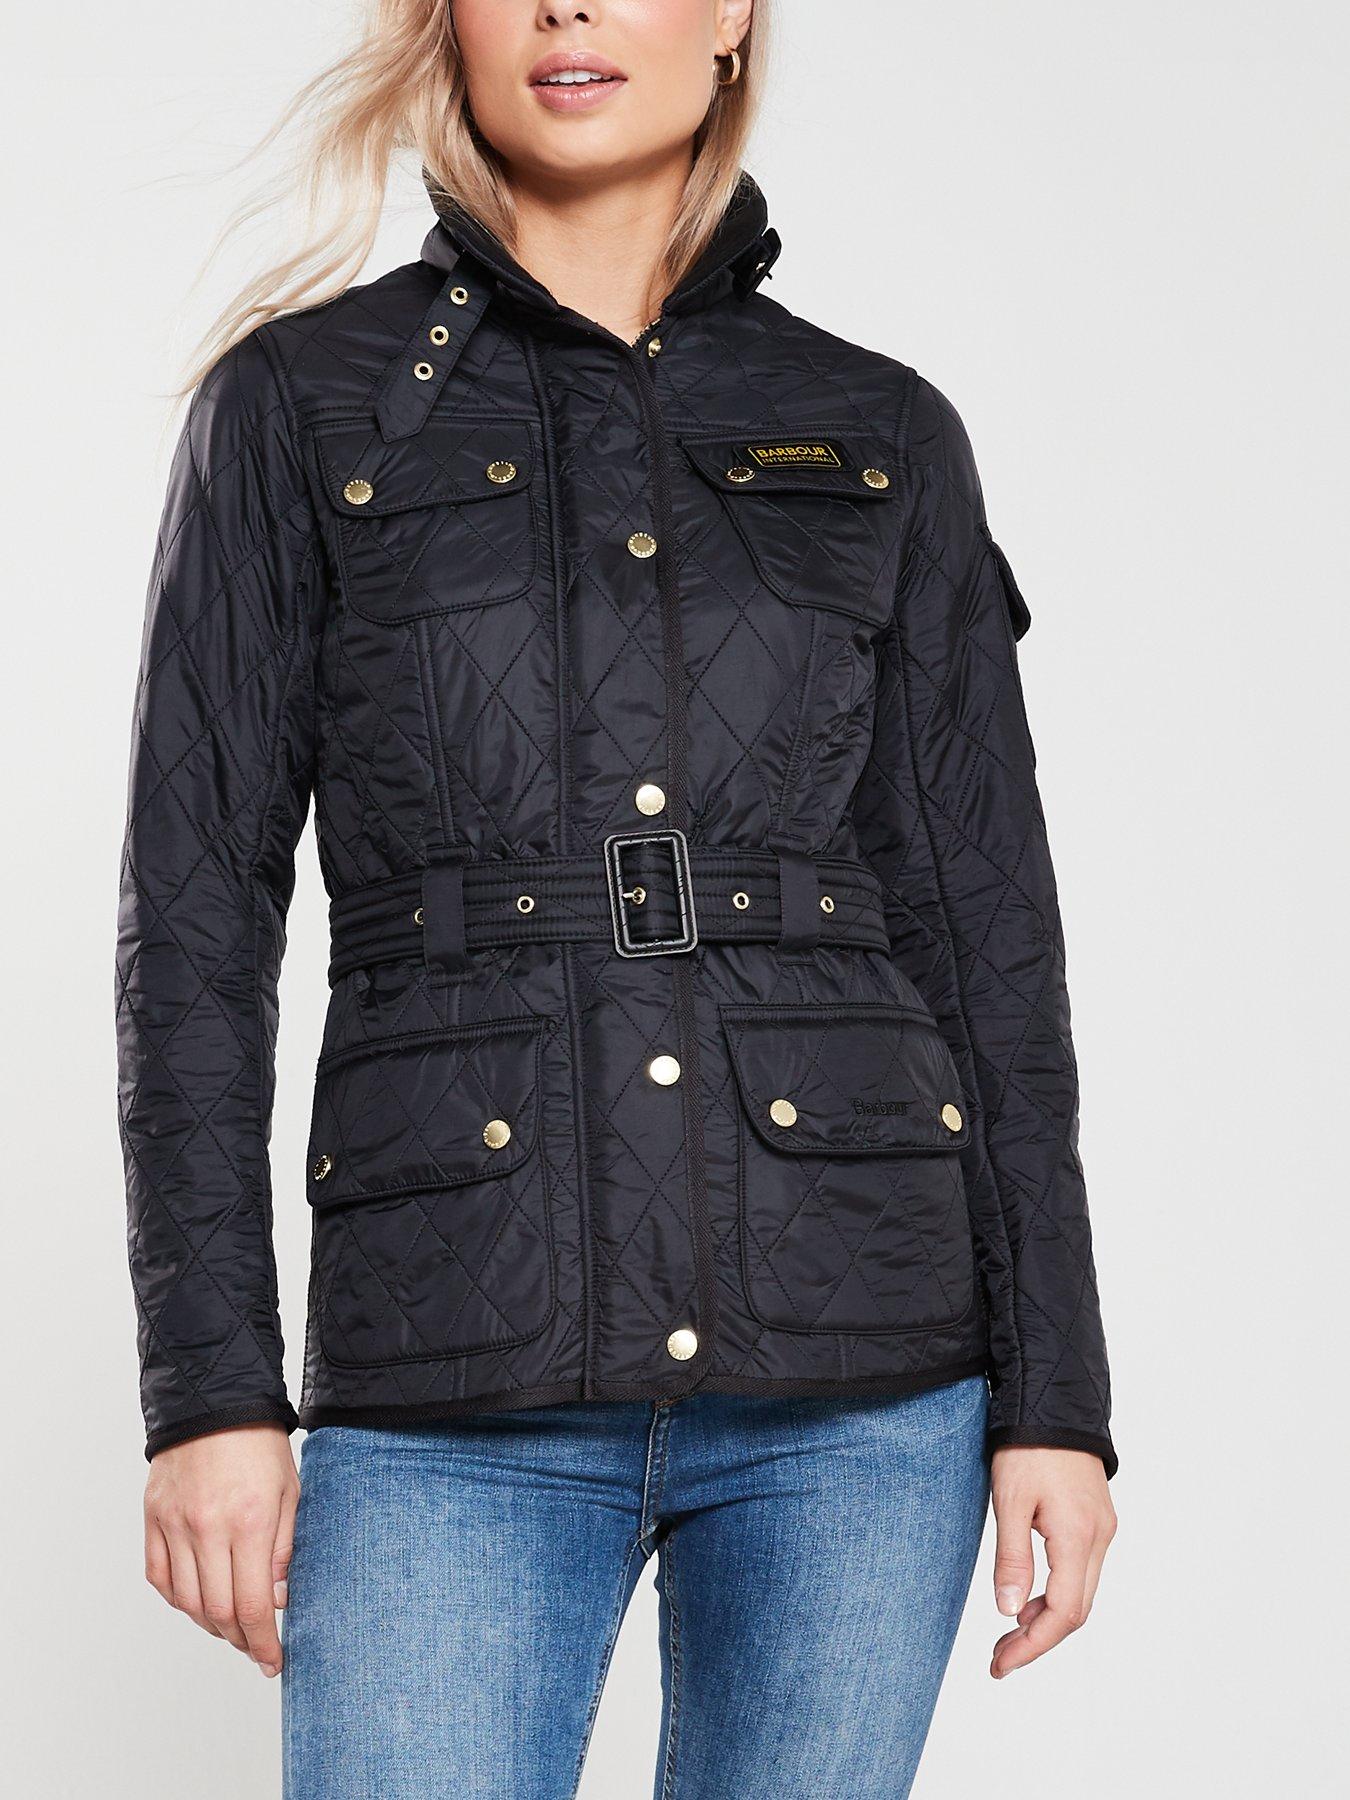 barbour international quilted jacket sale